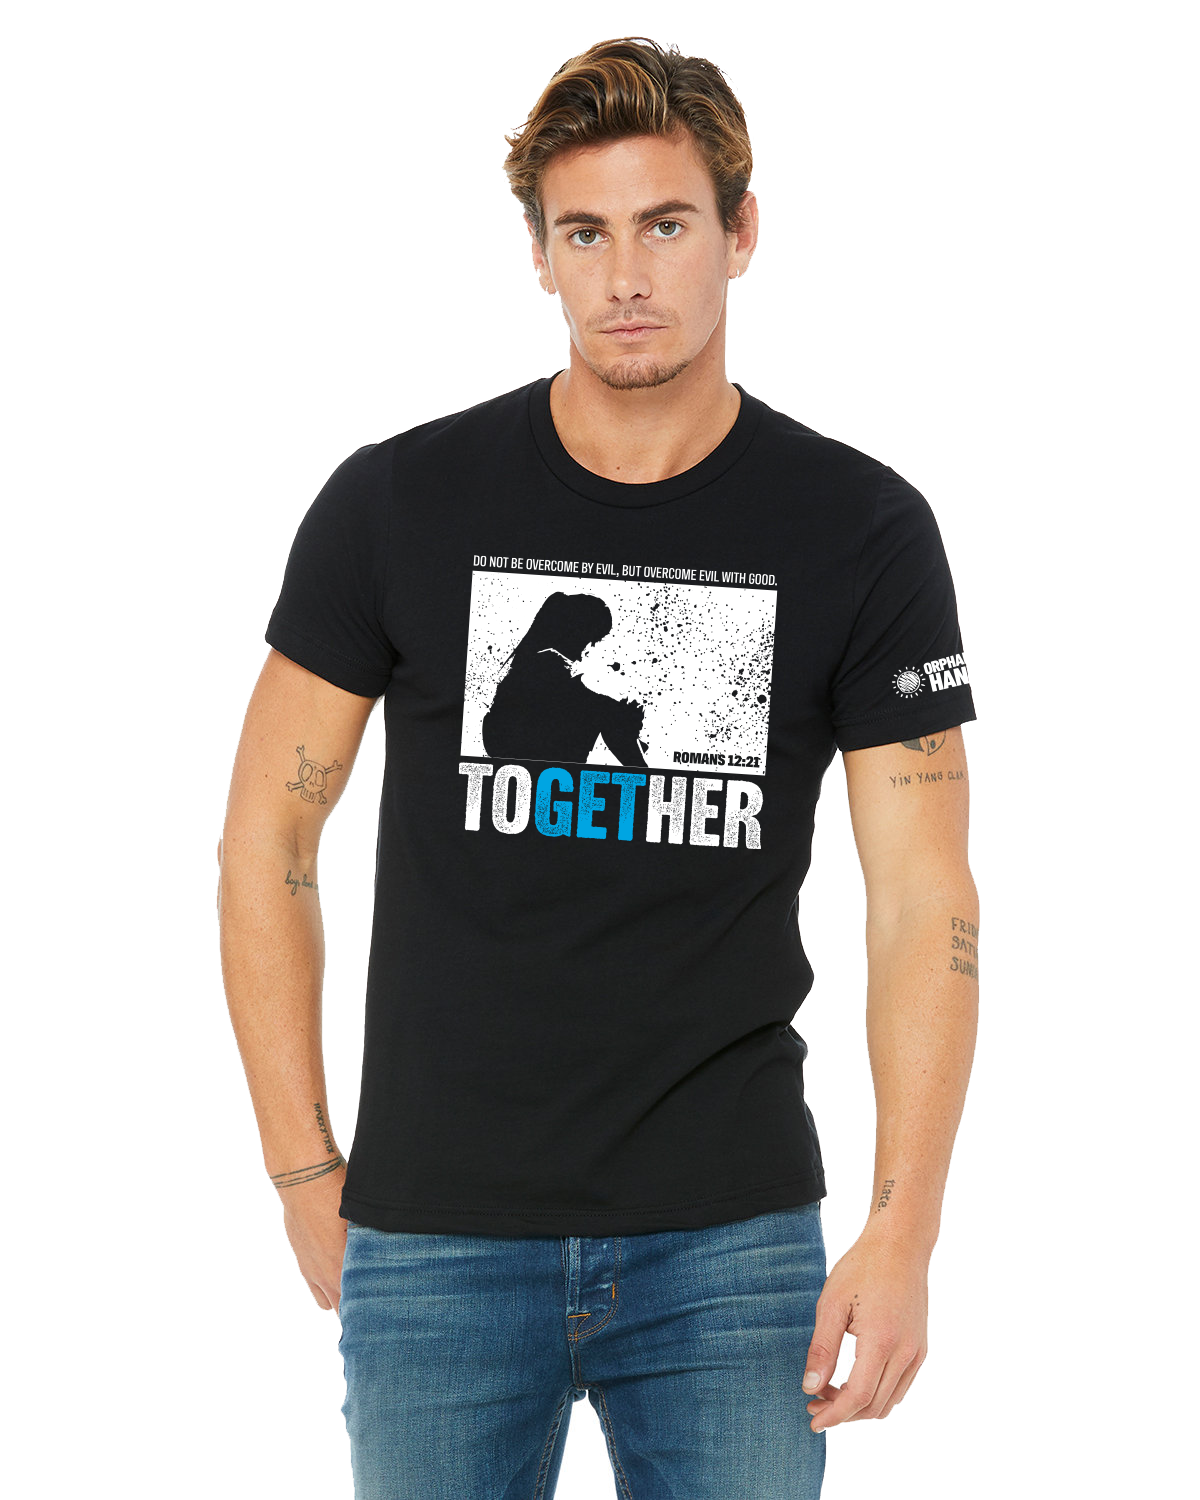 "ToGetHer" Unisex Jersey Tee - Stand United Against Injustice